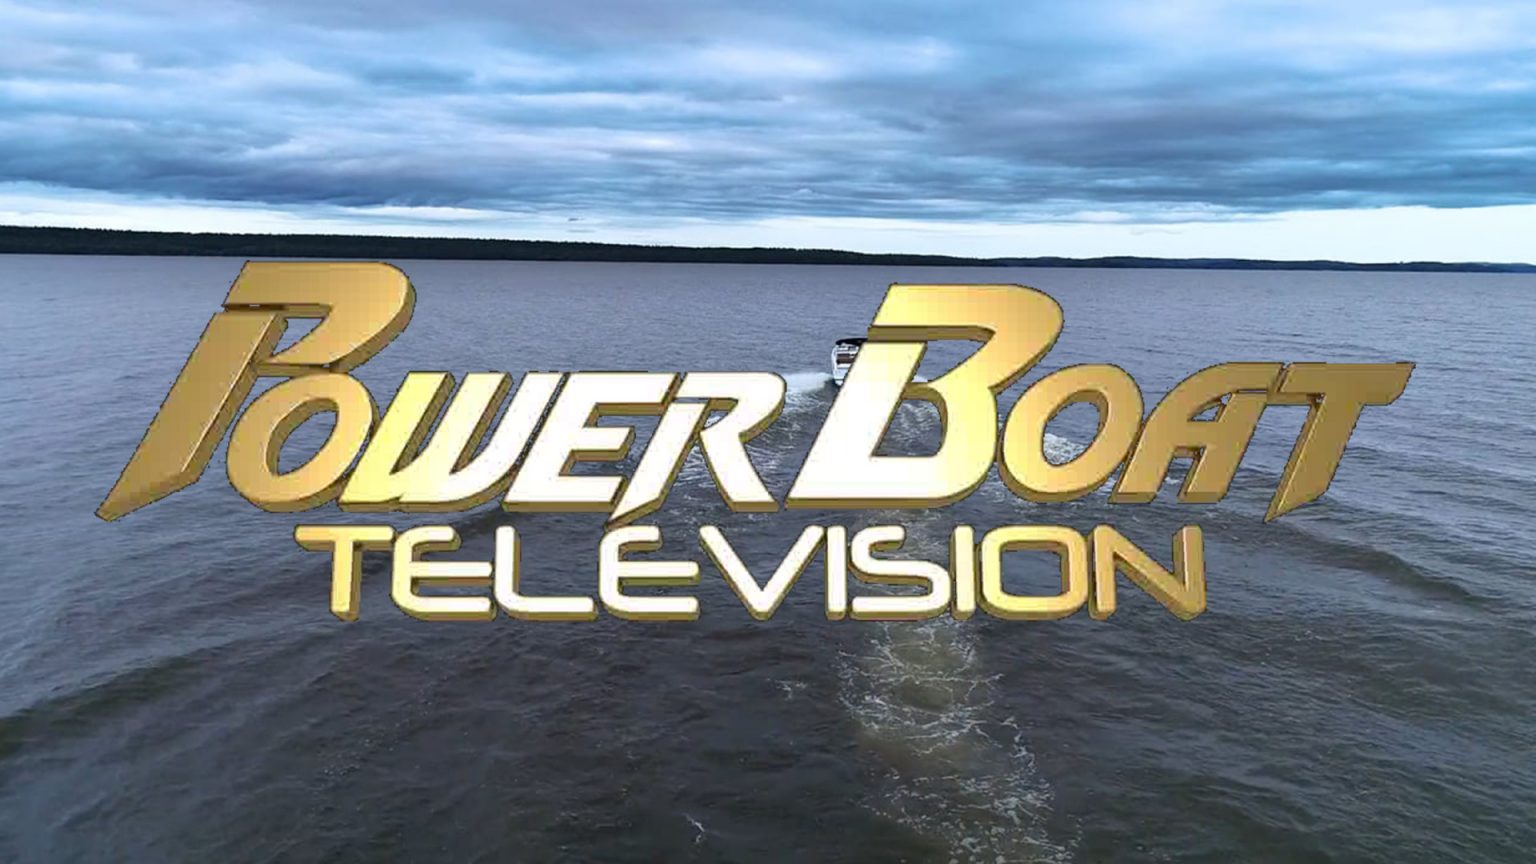 powerboat television 2022